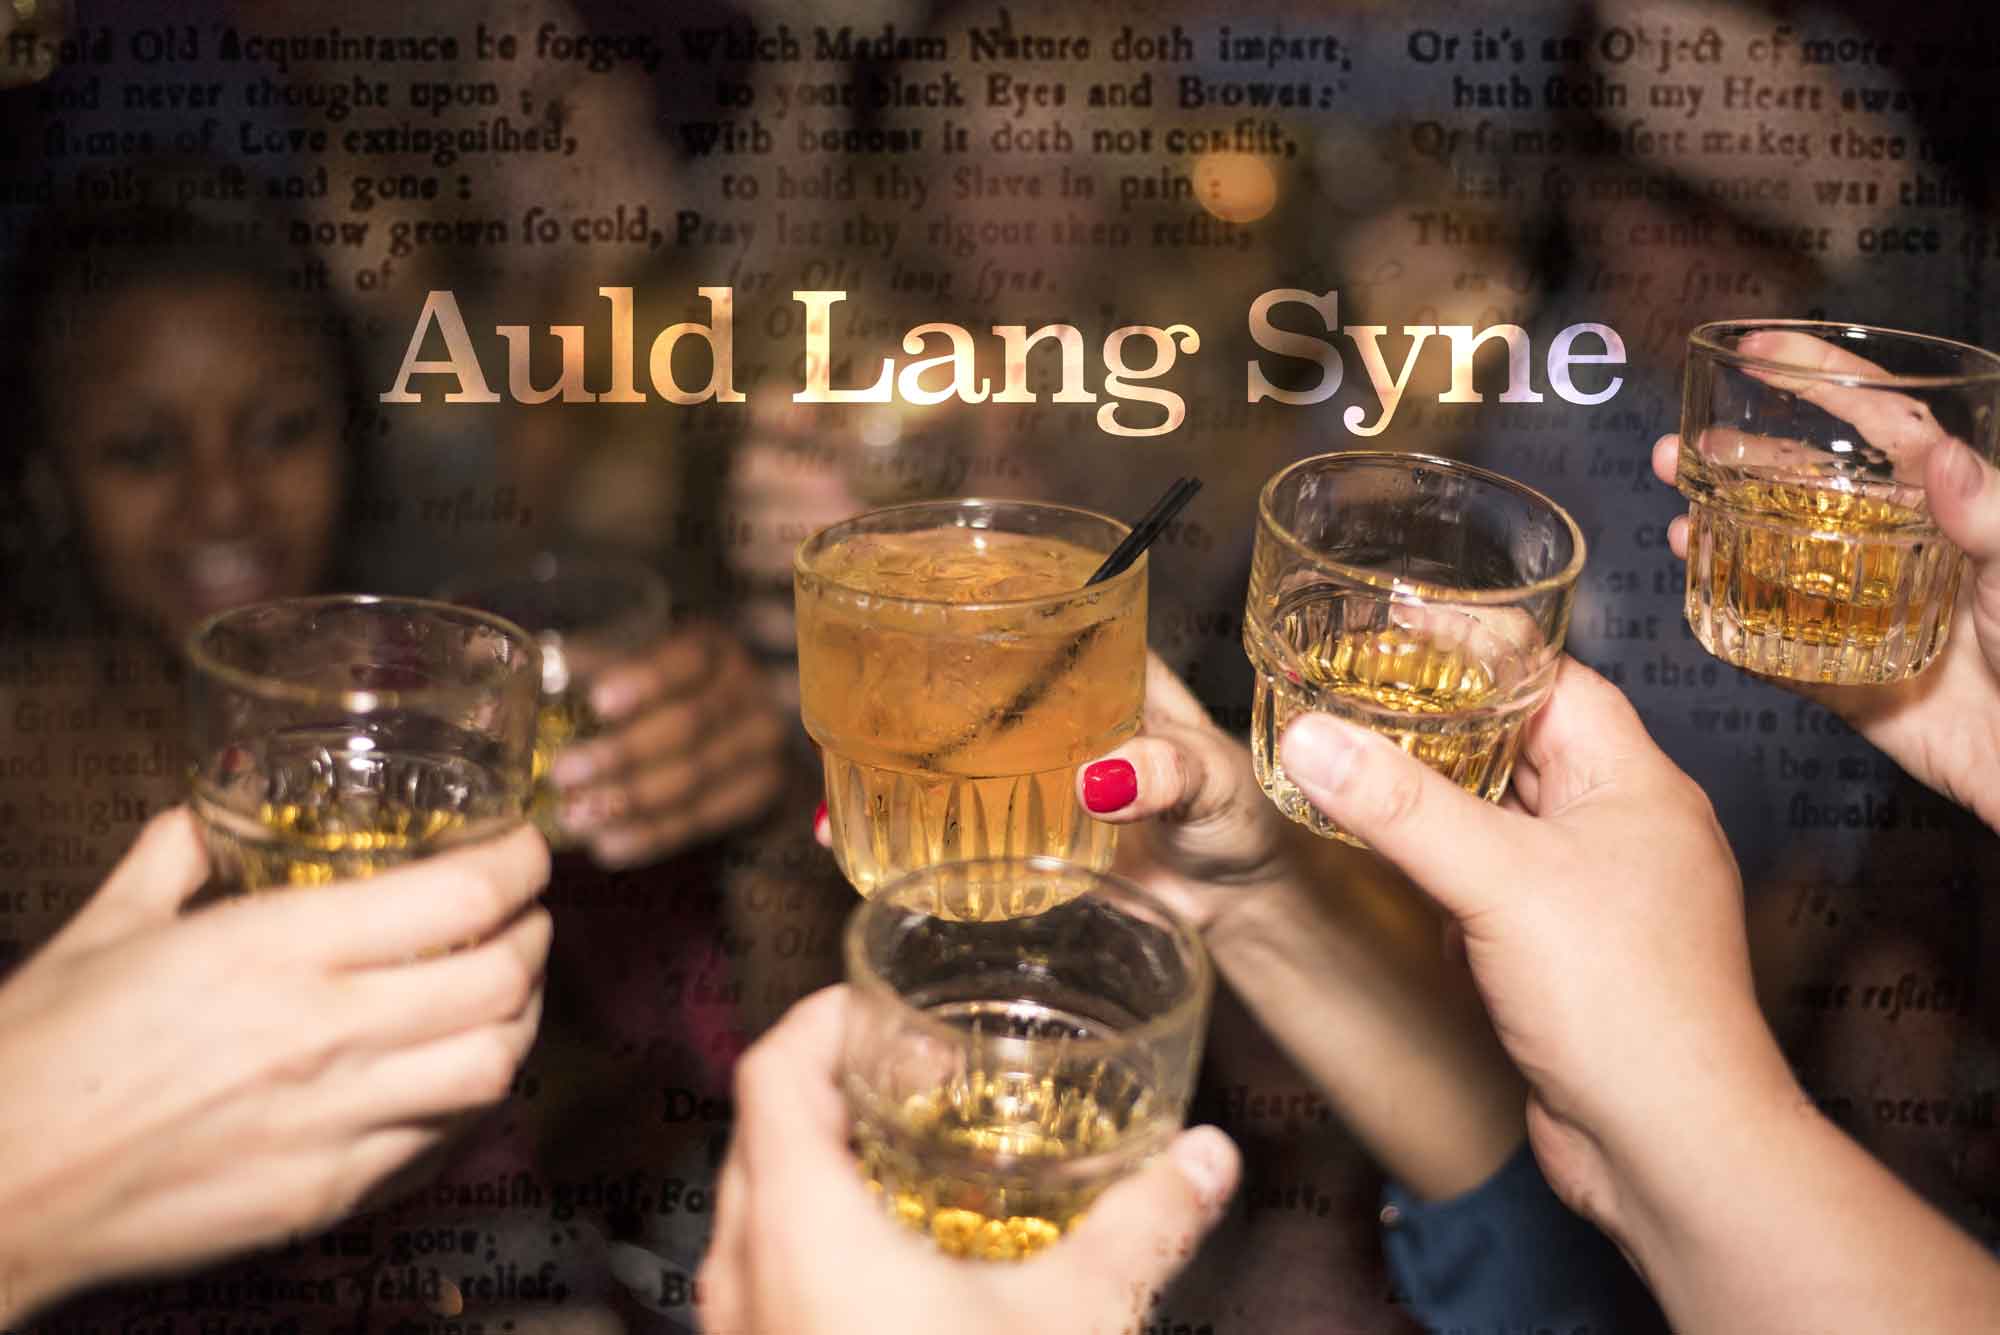 What's The Meaning Of Auld Lang Syne?: The History Behind The Popular New Year's Song